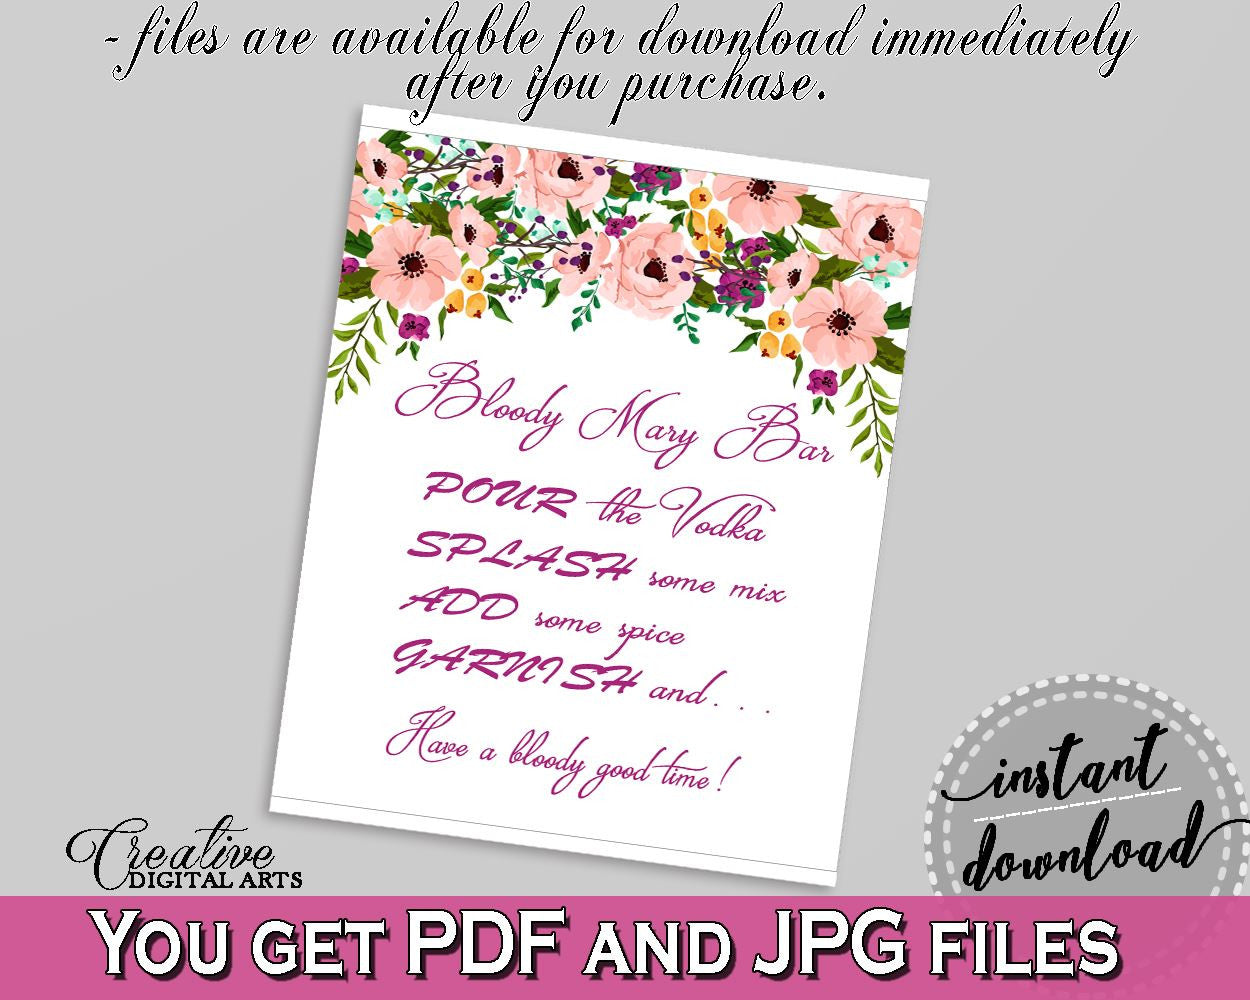 White And Pink Watercolor Flowers Bridal Shower Theme: Bloody Mary Bar Sign - spice, flowers theme, party organization, party plan - 9GOY4 - Digital Product